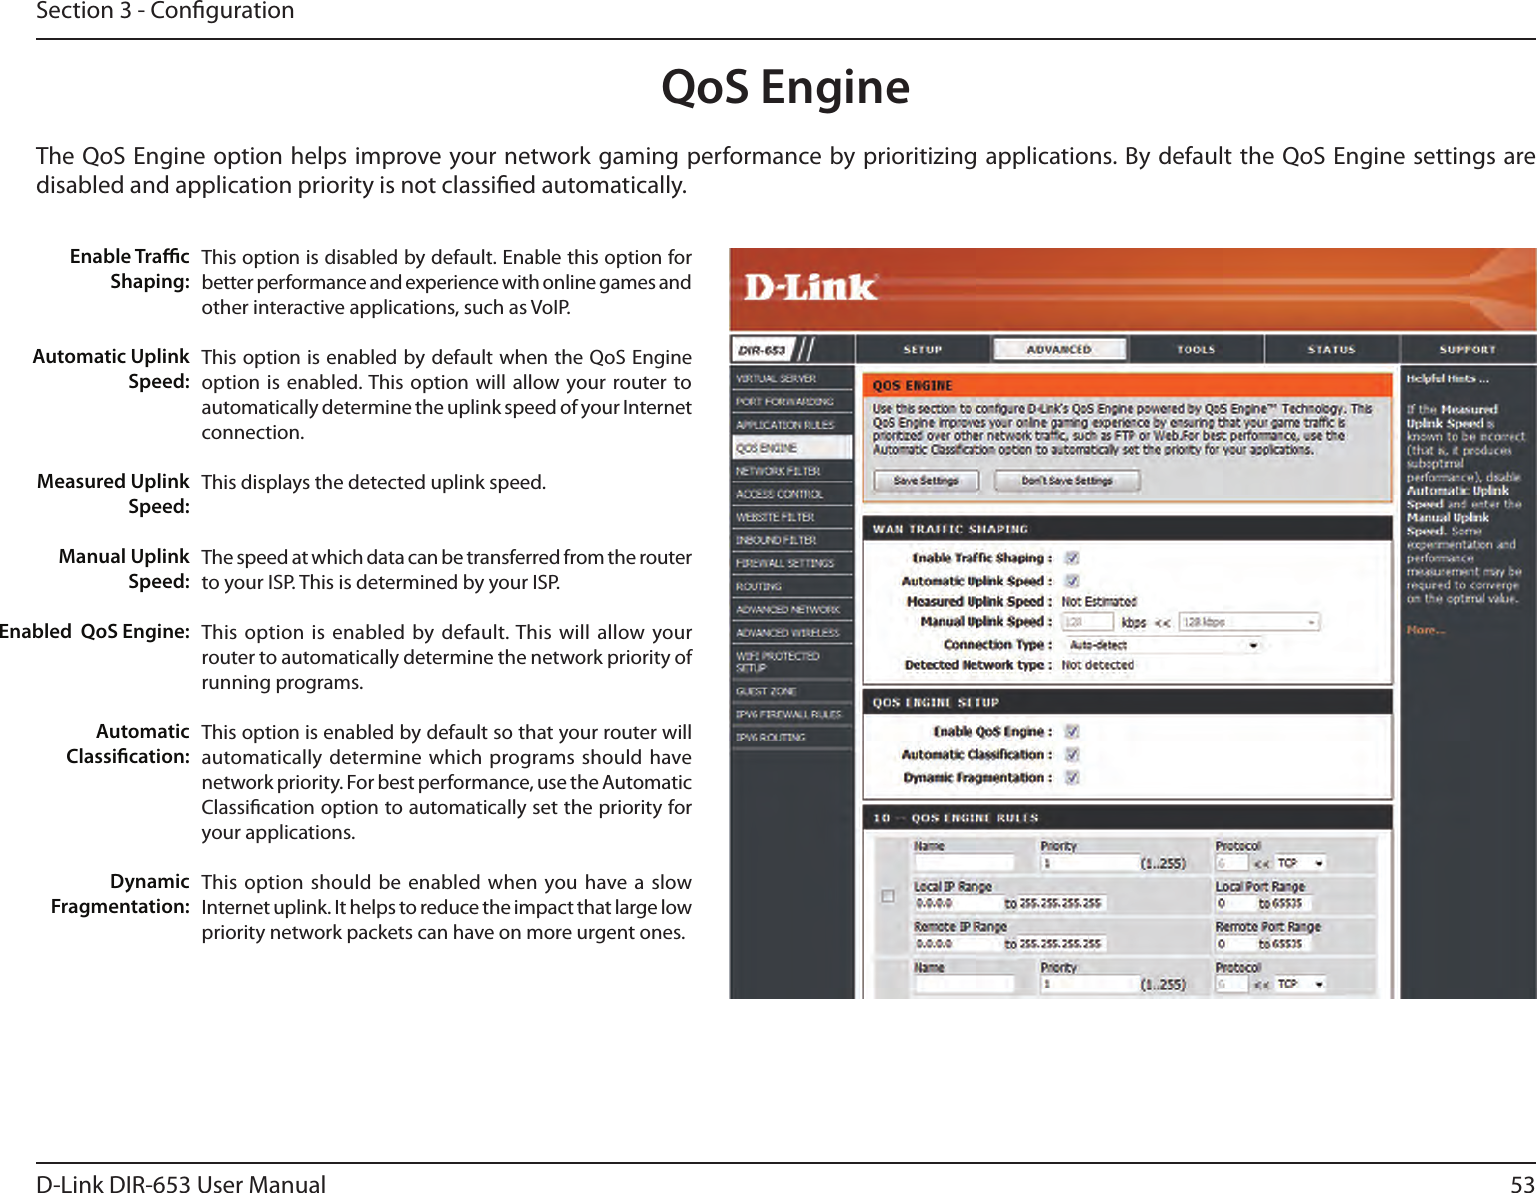 53D-Link DIR-653 User ManualSection 3 - CongurationQoS EngineThe QoS Engine option helps improve your network gaming performance by prioritizing applications. By default the QoS Engine settings are disabled and application priority is not classied automatically.This option is disabled by default. Enable this option for better performance and experience with online games and other interactive applications, such as VoIP.This option is enabled by default when the QoS Engine option is  enabled. This option  will  allow your router to automatically determine the uplink speed of your Internet connection.This displays the detected uplink speed.The speed at which data can be transferred from the router to your ISP. This is determined by your ISP. This option  is enabled  by default. This will allow your router to automatically determine the network priority of running programs.This option is enabled by default so that your router will automatically determine which programs should  have network priority. For best performance, use the Automatic Classication option to automatically set the priority for your applications.This option  should be  enabled when you have a slow Internet uplink. It helps to reduce the impact that large low priority network packets can have on more urgent ones.Enable TracShaping:Automatic UplinkSpeed:Measured UplinkSpeed:Manual UplinkSpeed:Enabled  QoS Engine:Automatic Classication:Dynamic Fragmentation: